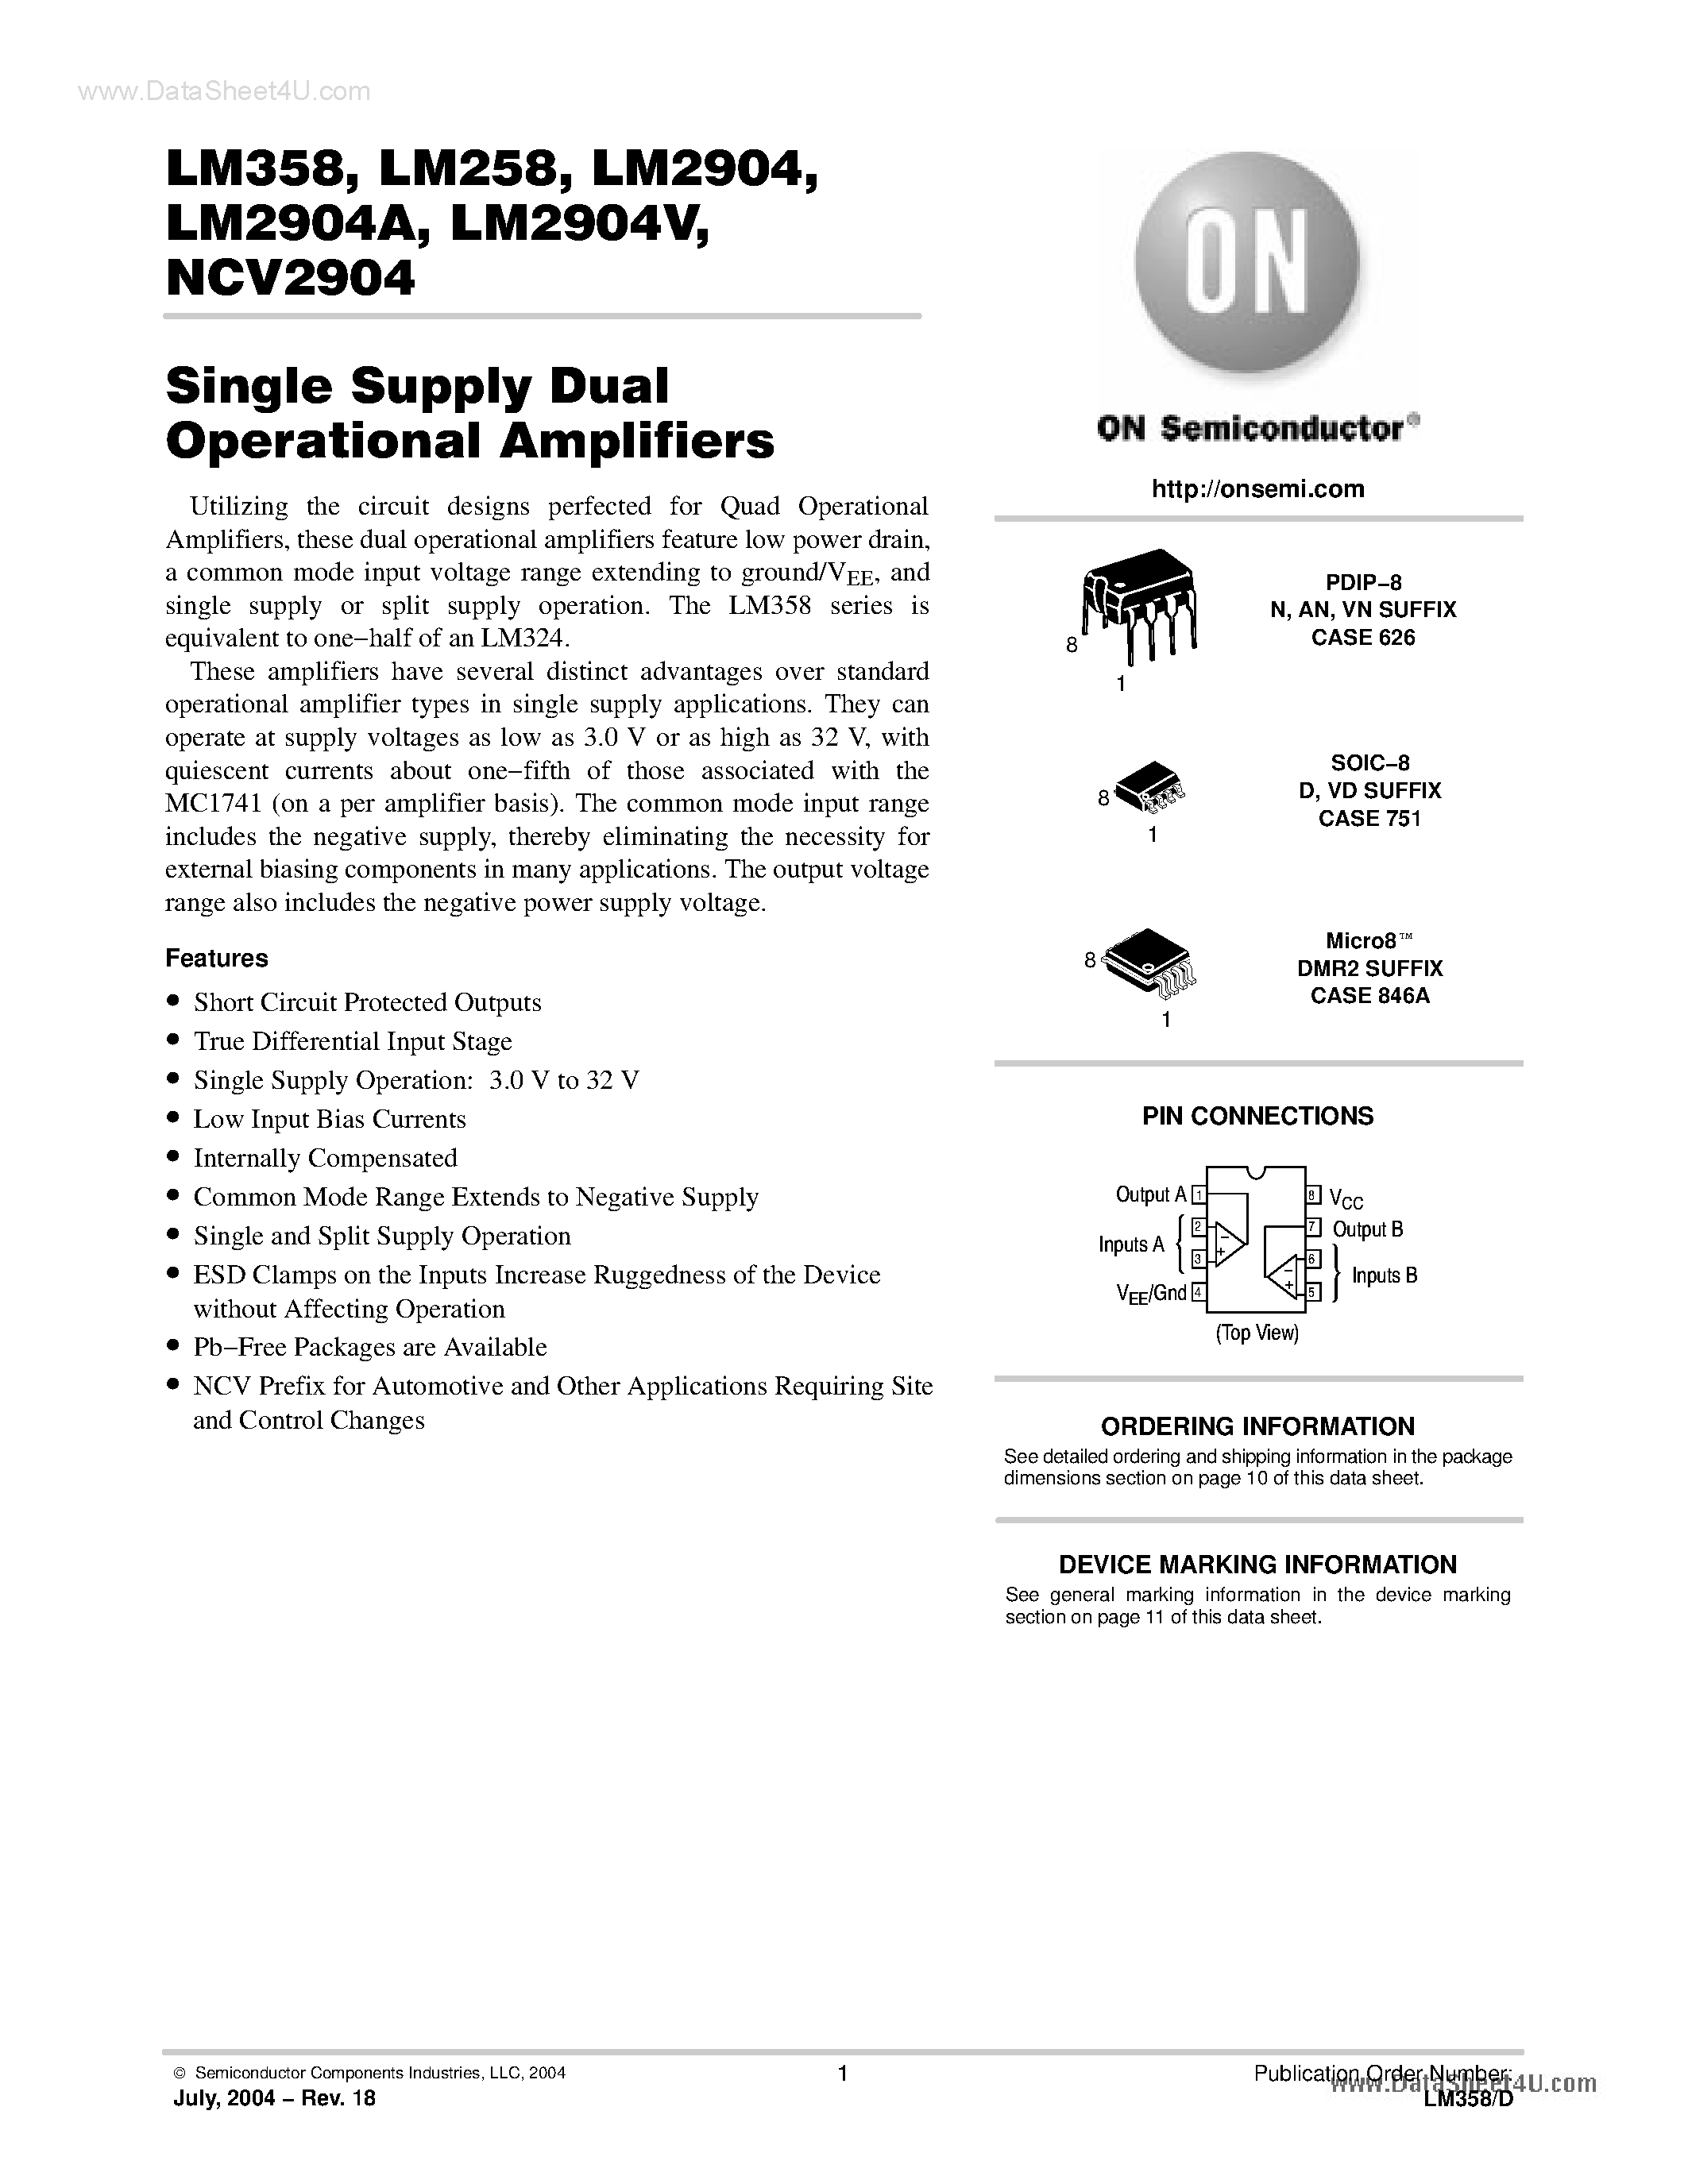 Datasheet LM2904 - Single Supply Dual Operational Amplifiers page 1